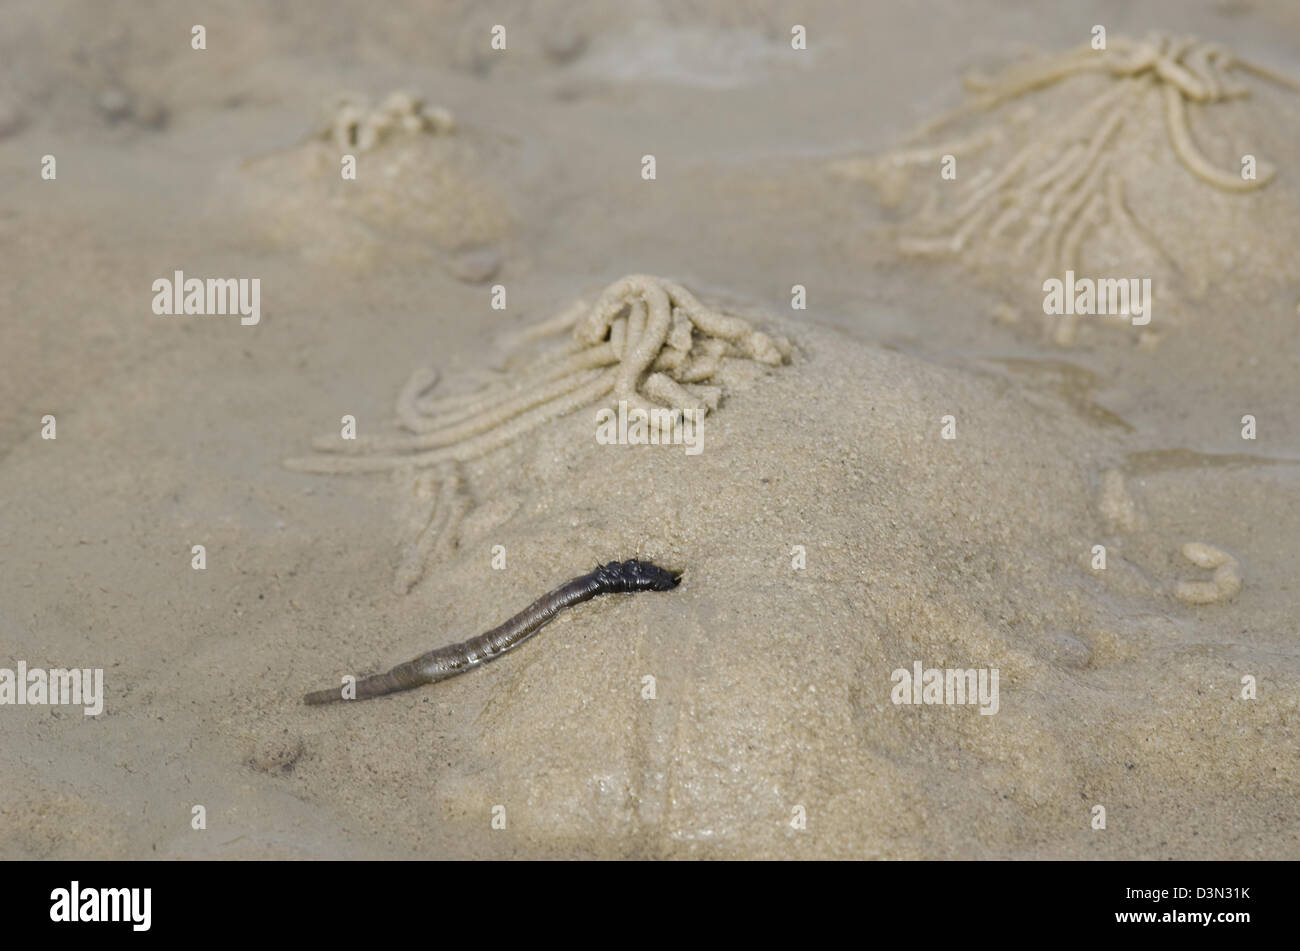 Burrows of the lugworm or sandworm, Arenicola marina, in the